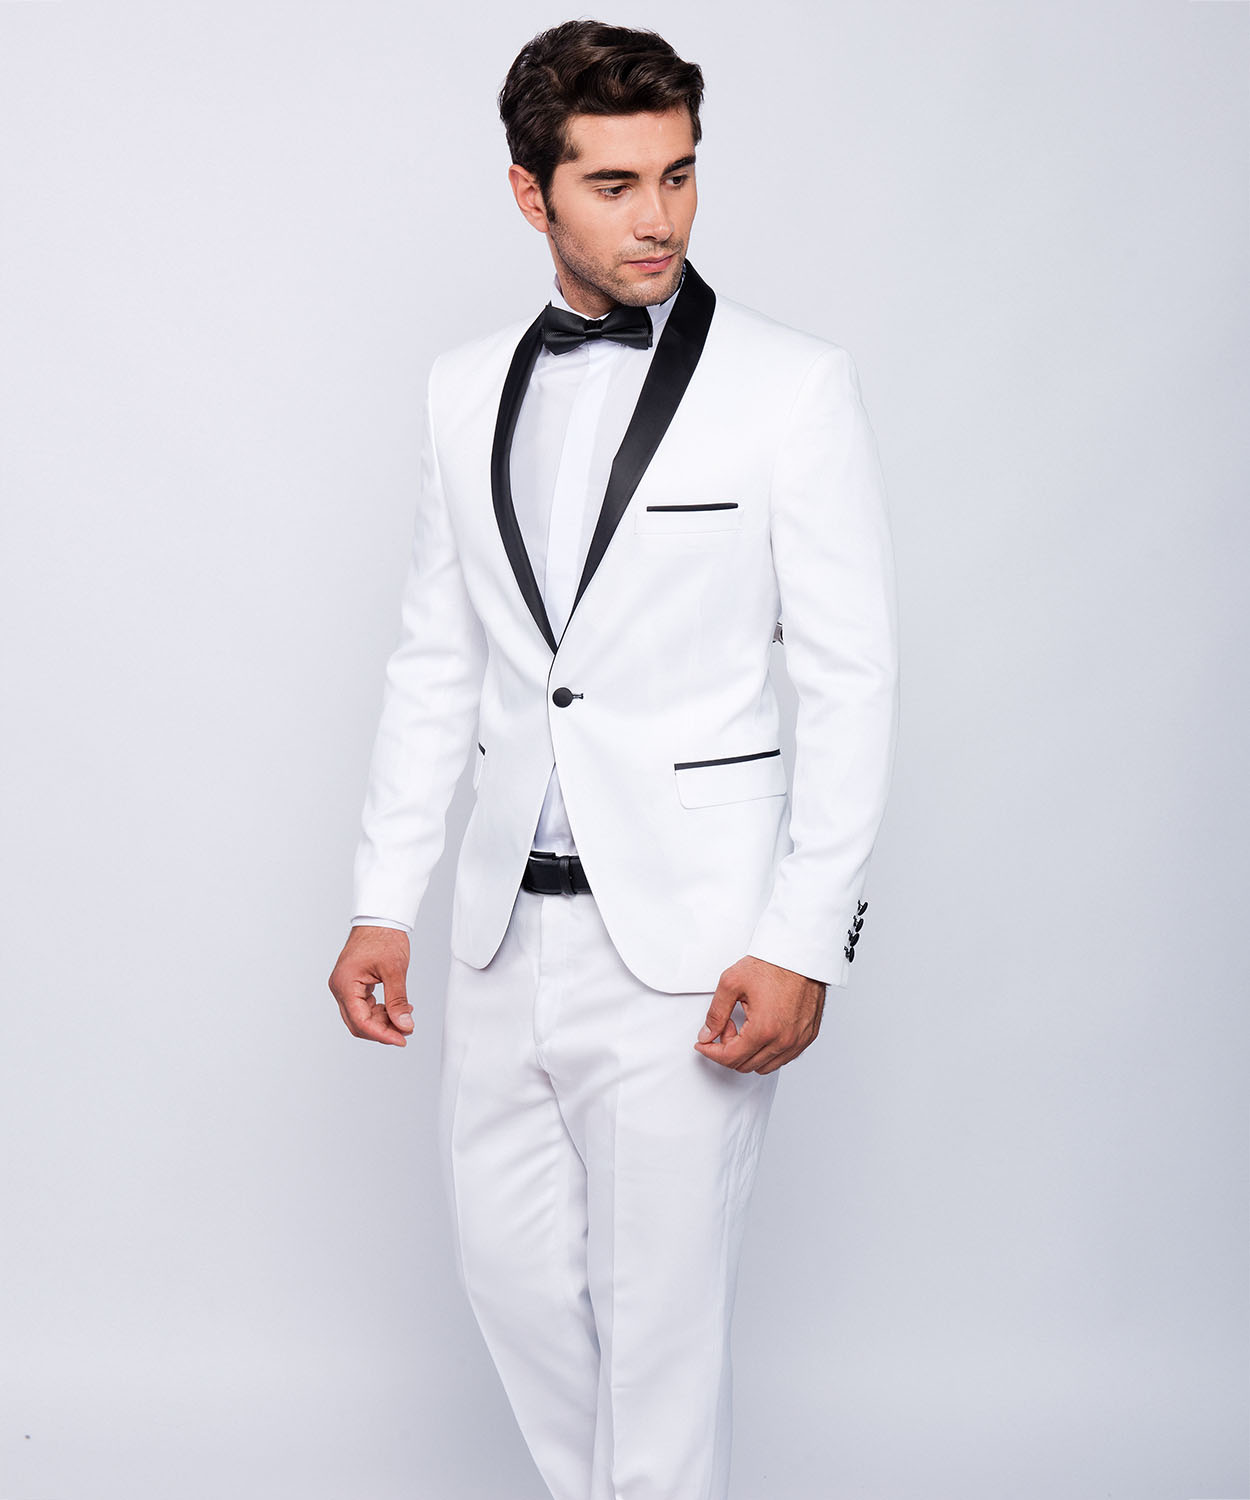 Slim Fit Mens Tuxedo in White-Wedding-Suit-Stage - JACKET-PARTY ...